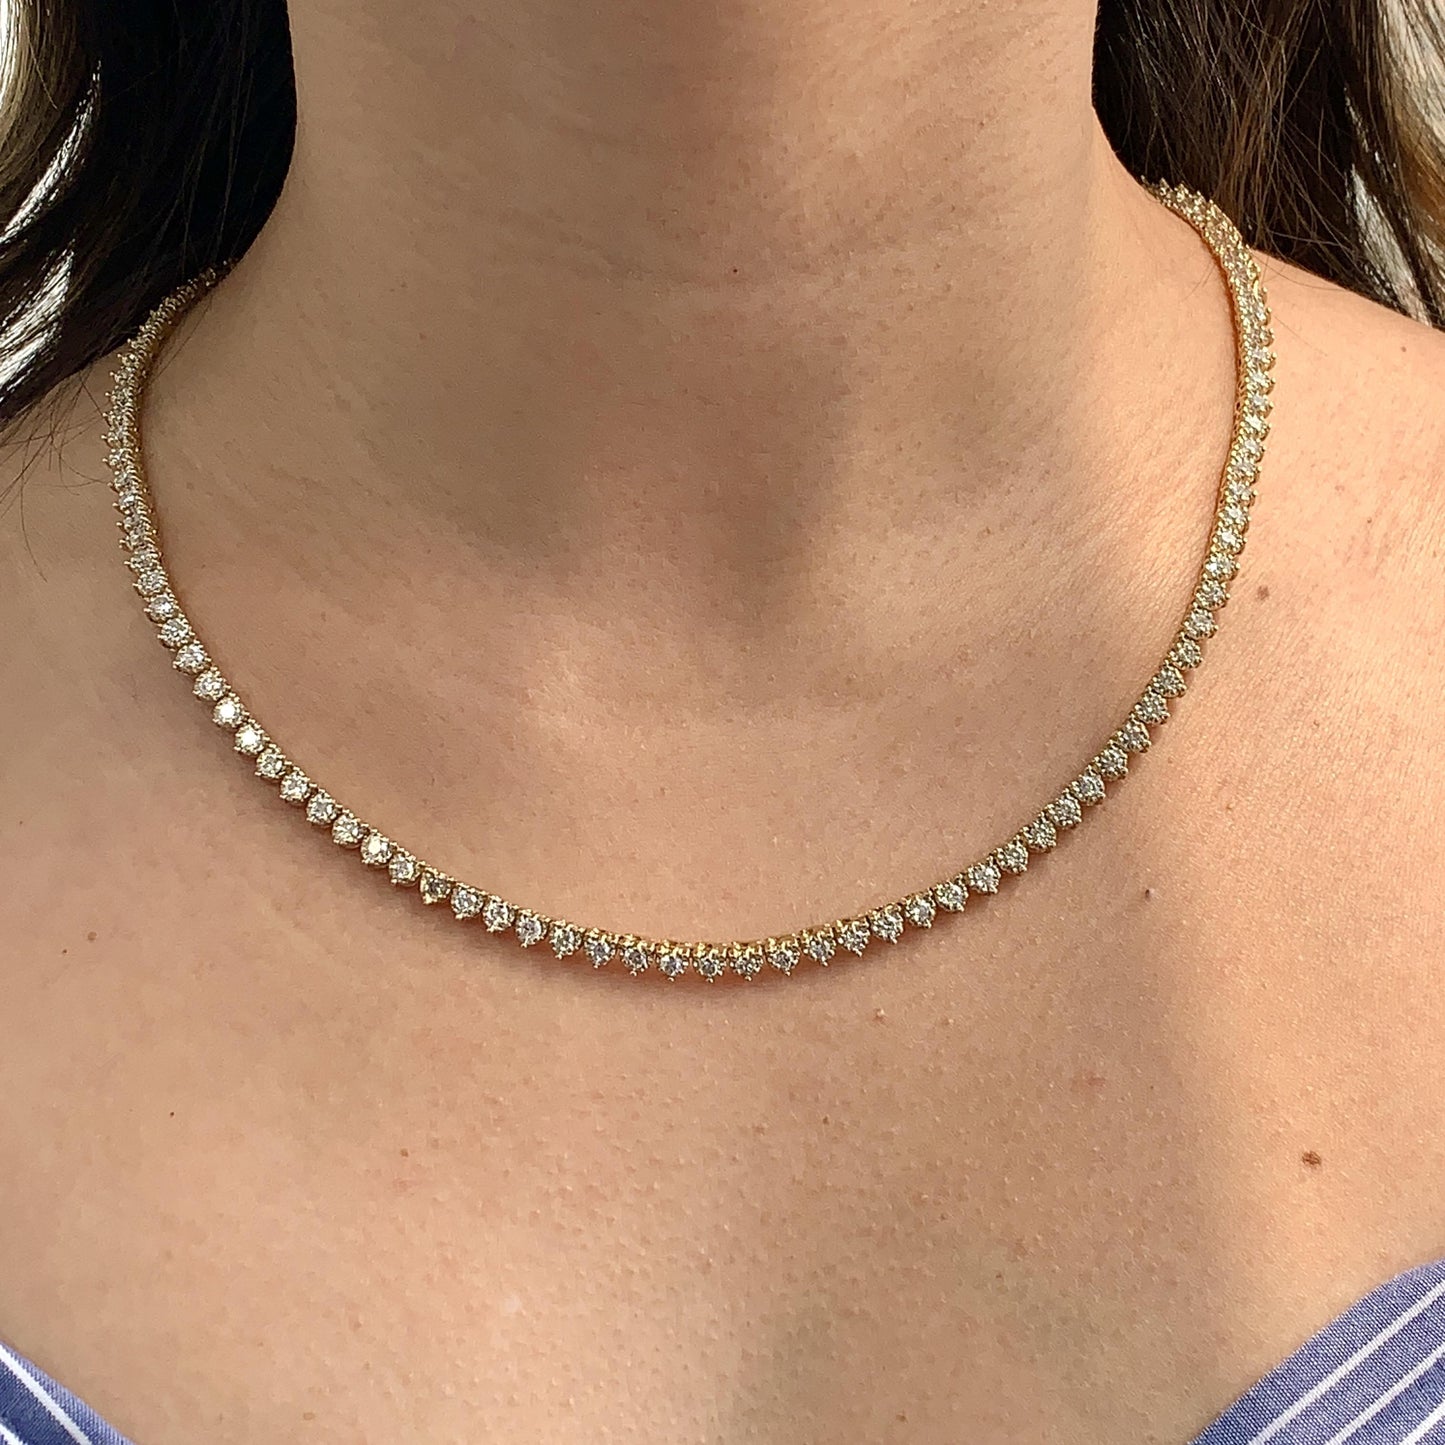 7 Cttw Diamond Necklace in 14k White Gold